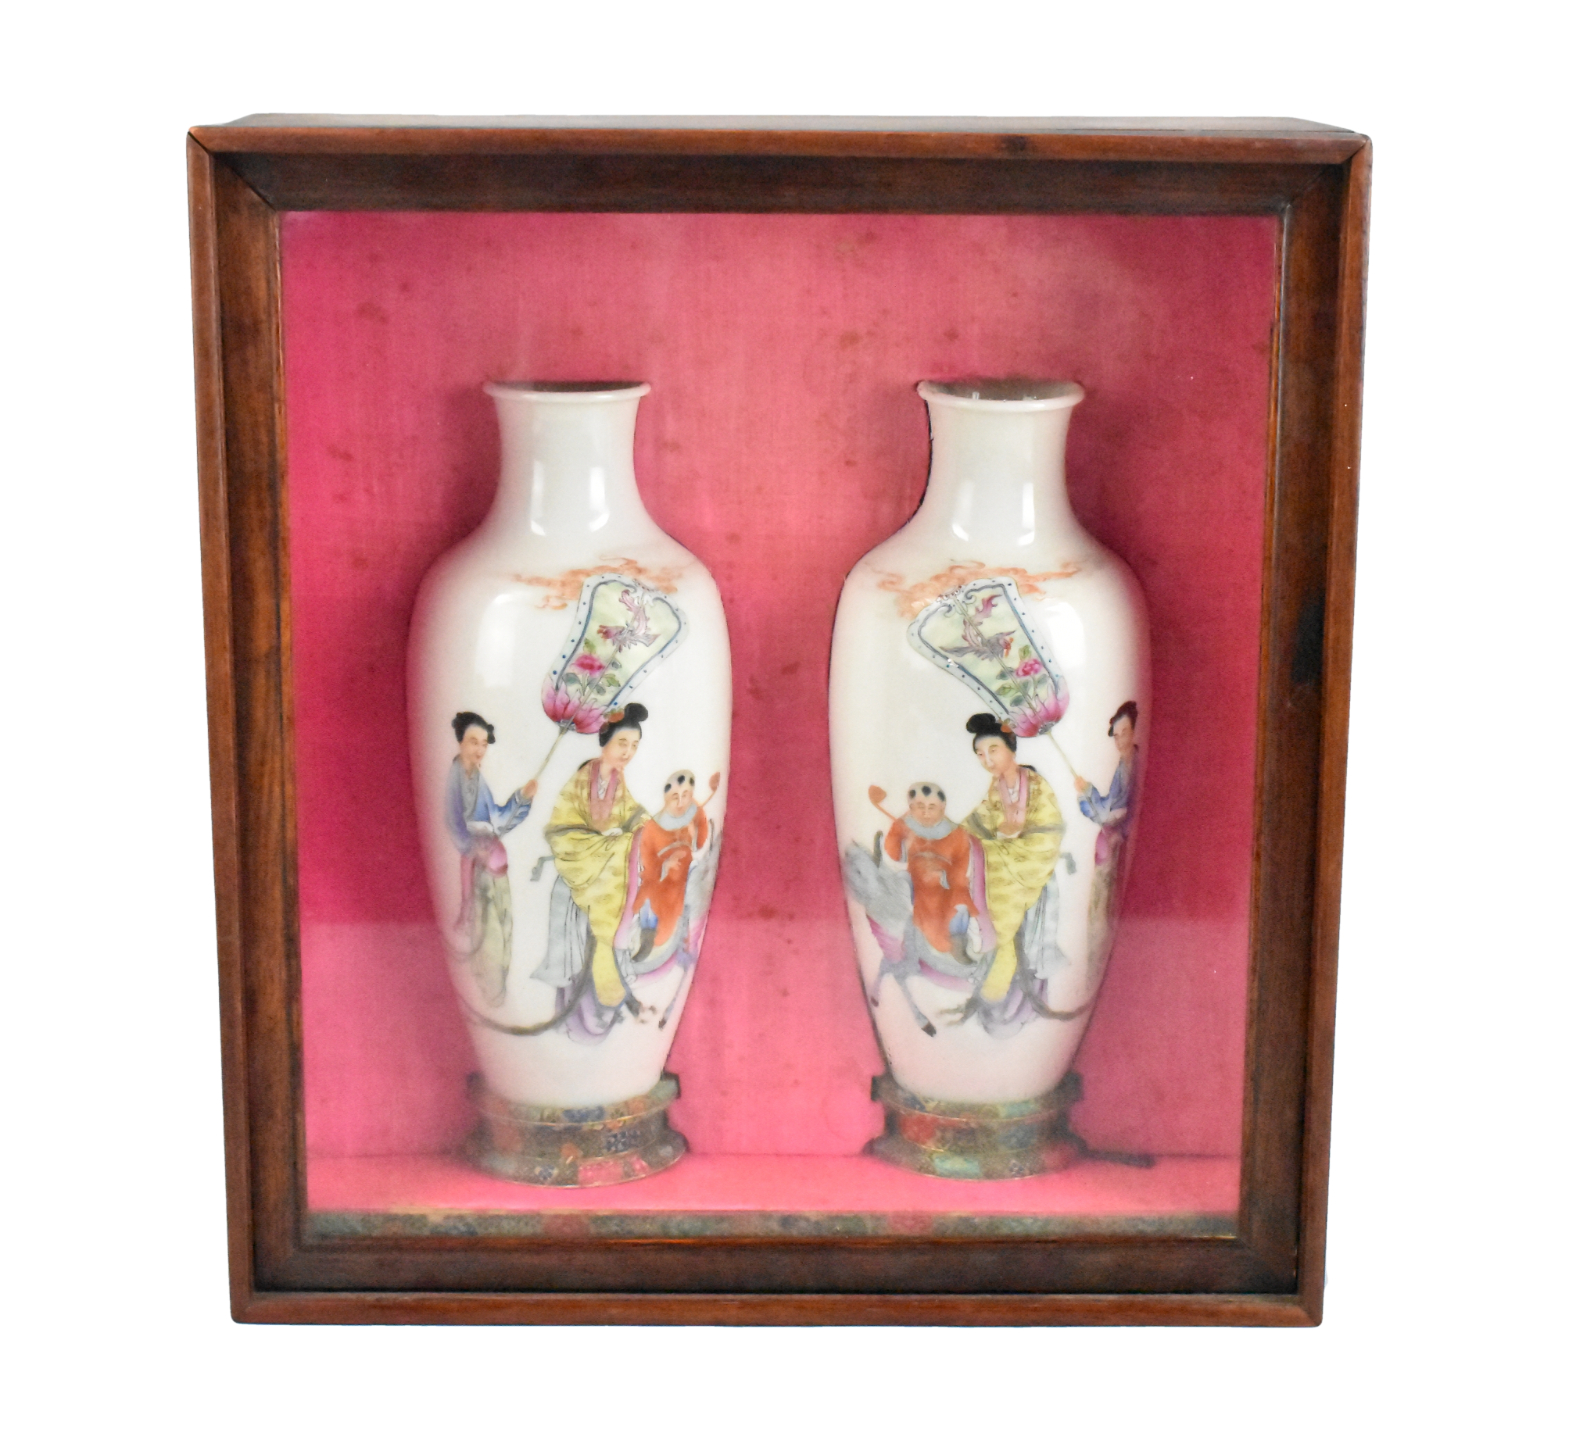 PAIR OF CHINESE ENAMELED FIGURE 33a35c